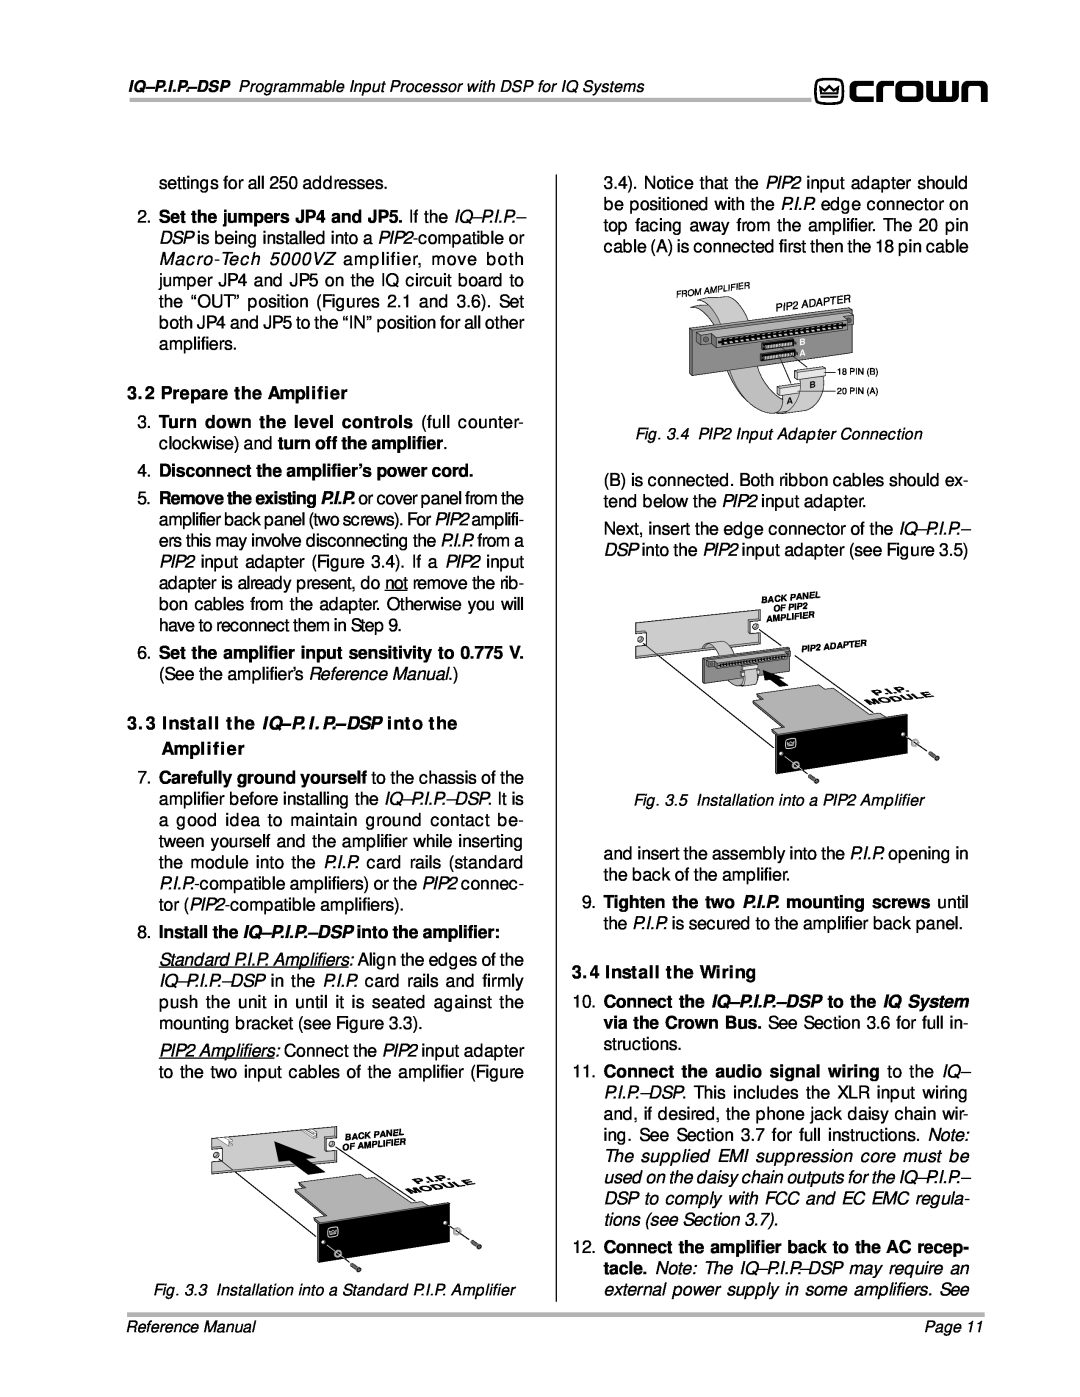 Crown Audio IQ P.I.P.-DSP manual Prepare the Amplifier, 3.3Install the IQ-P.I.P.-DSP into the Amplifier, Install the Wiring 